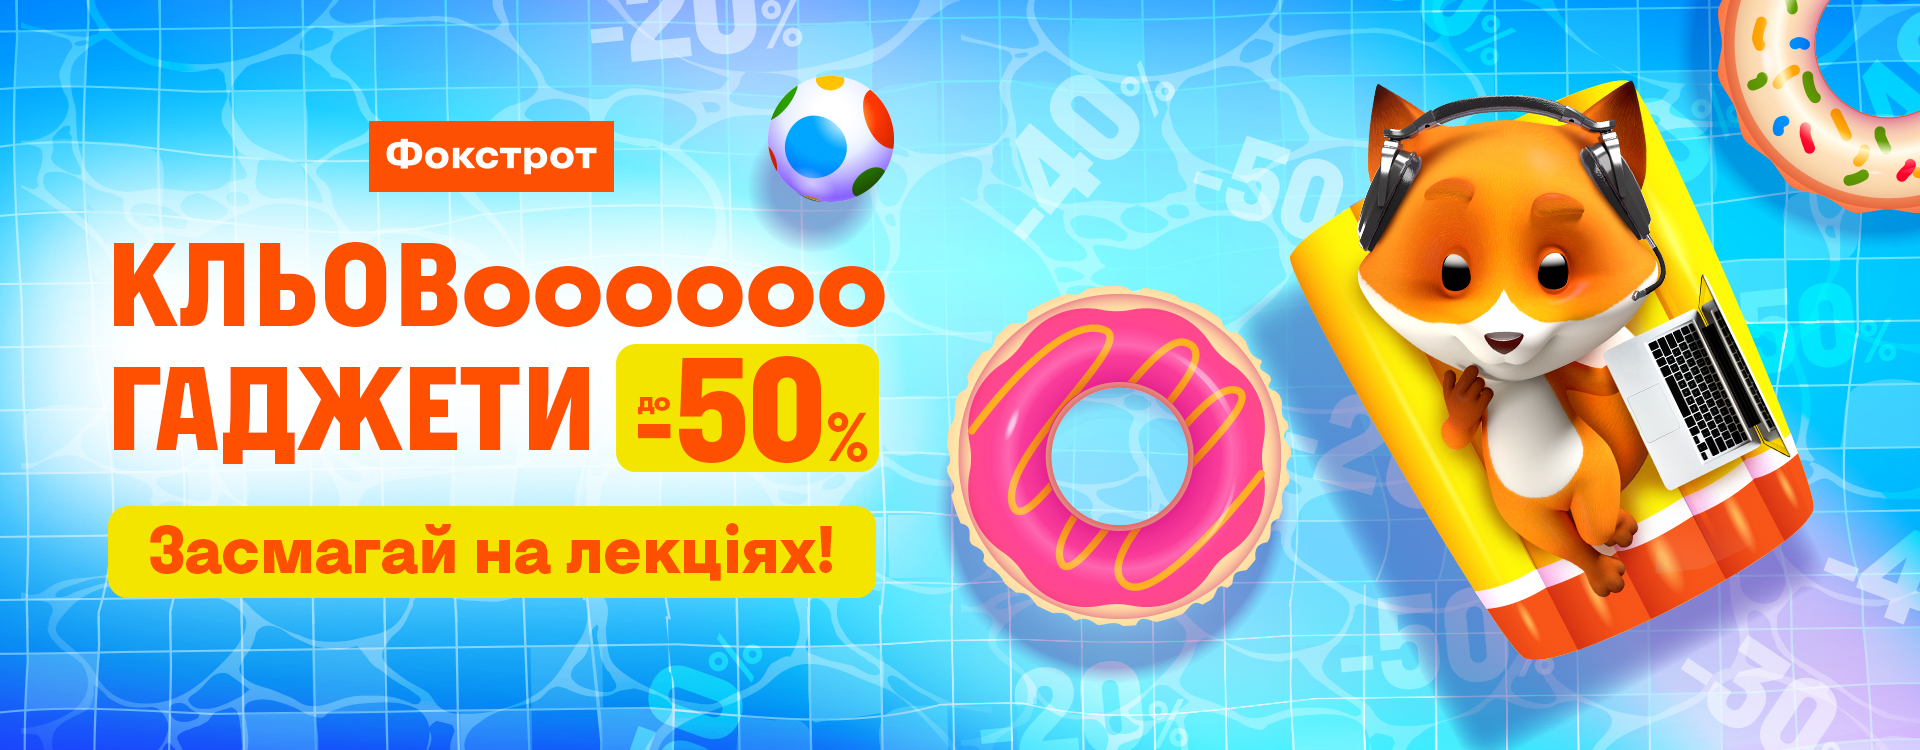 DISCOUNTS UP TO -50% on GADGETS